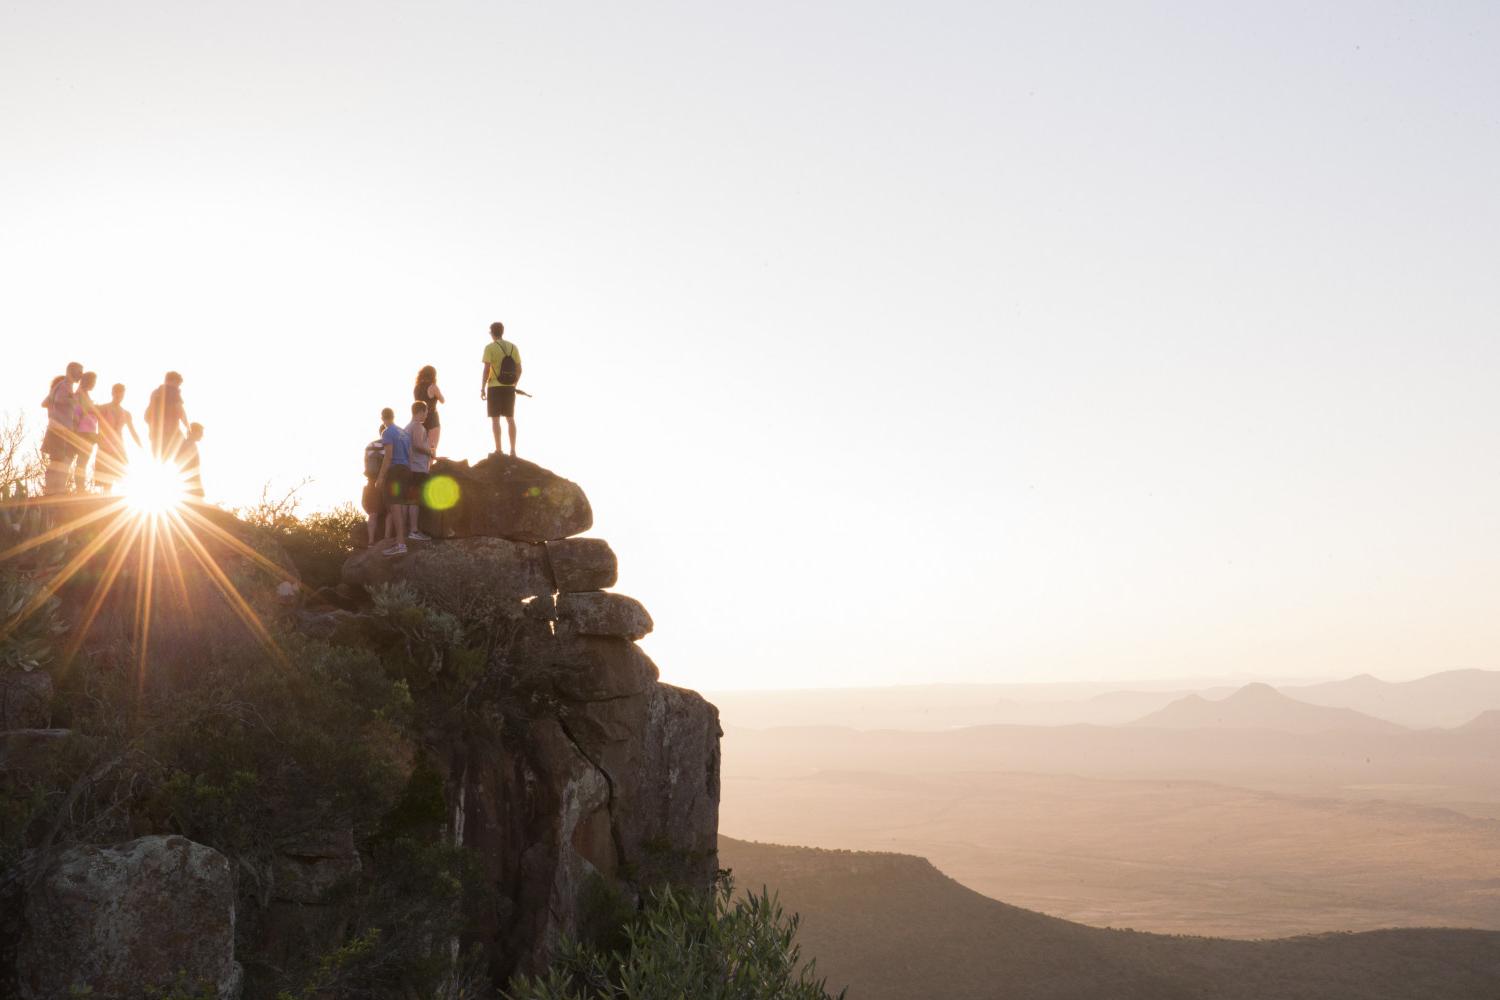 Students take in the views during a J-Term study tour to South Africa.